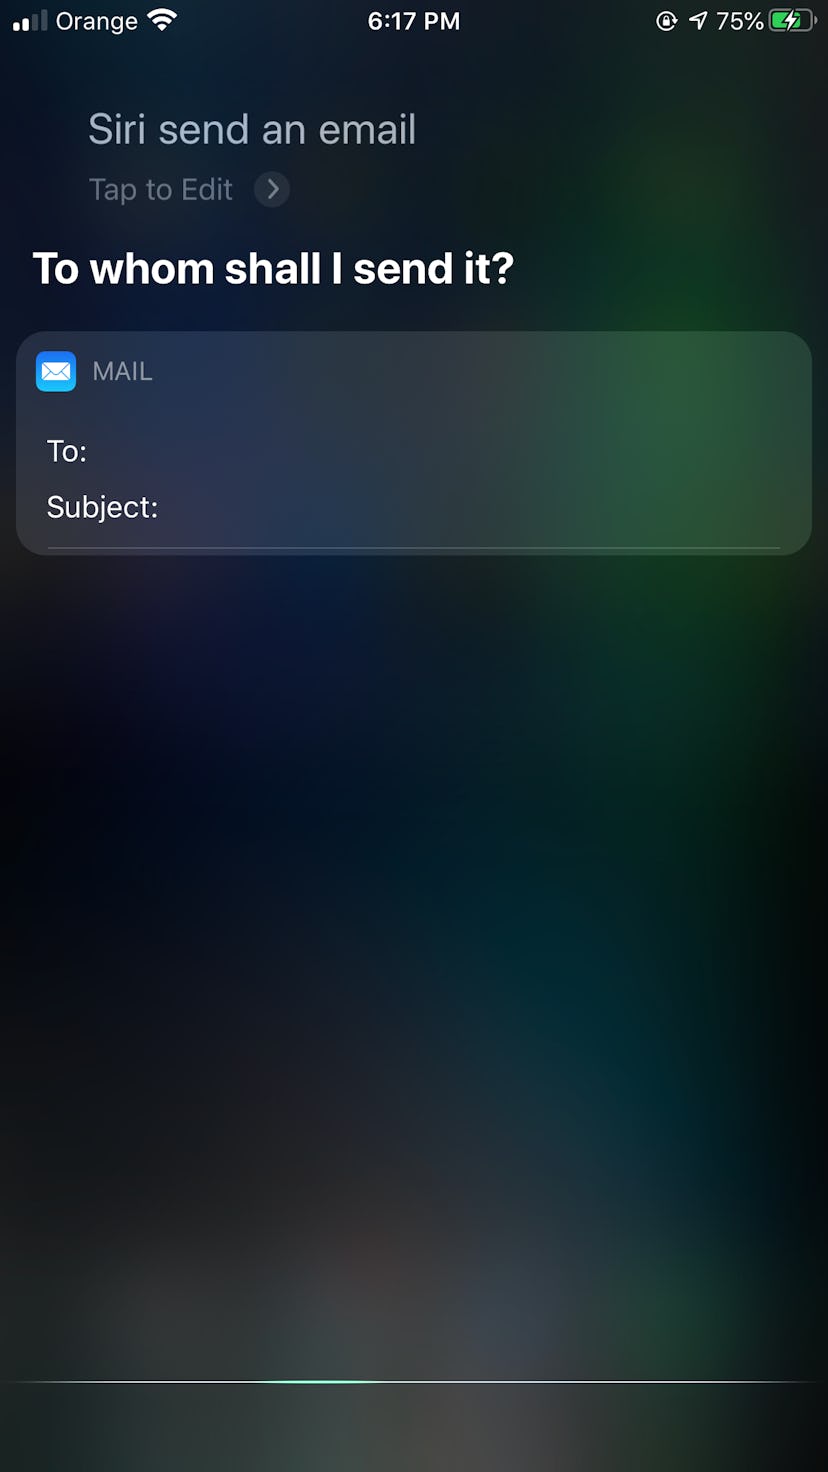 You can use Siri to draft up emails that you can dictate. 